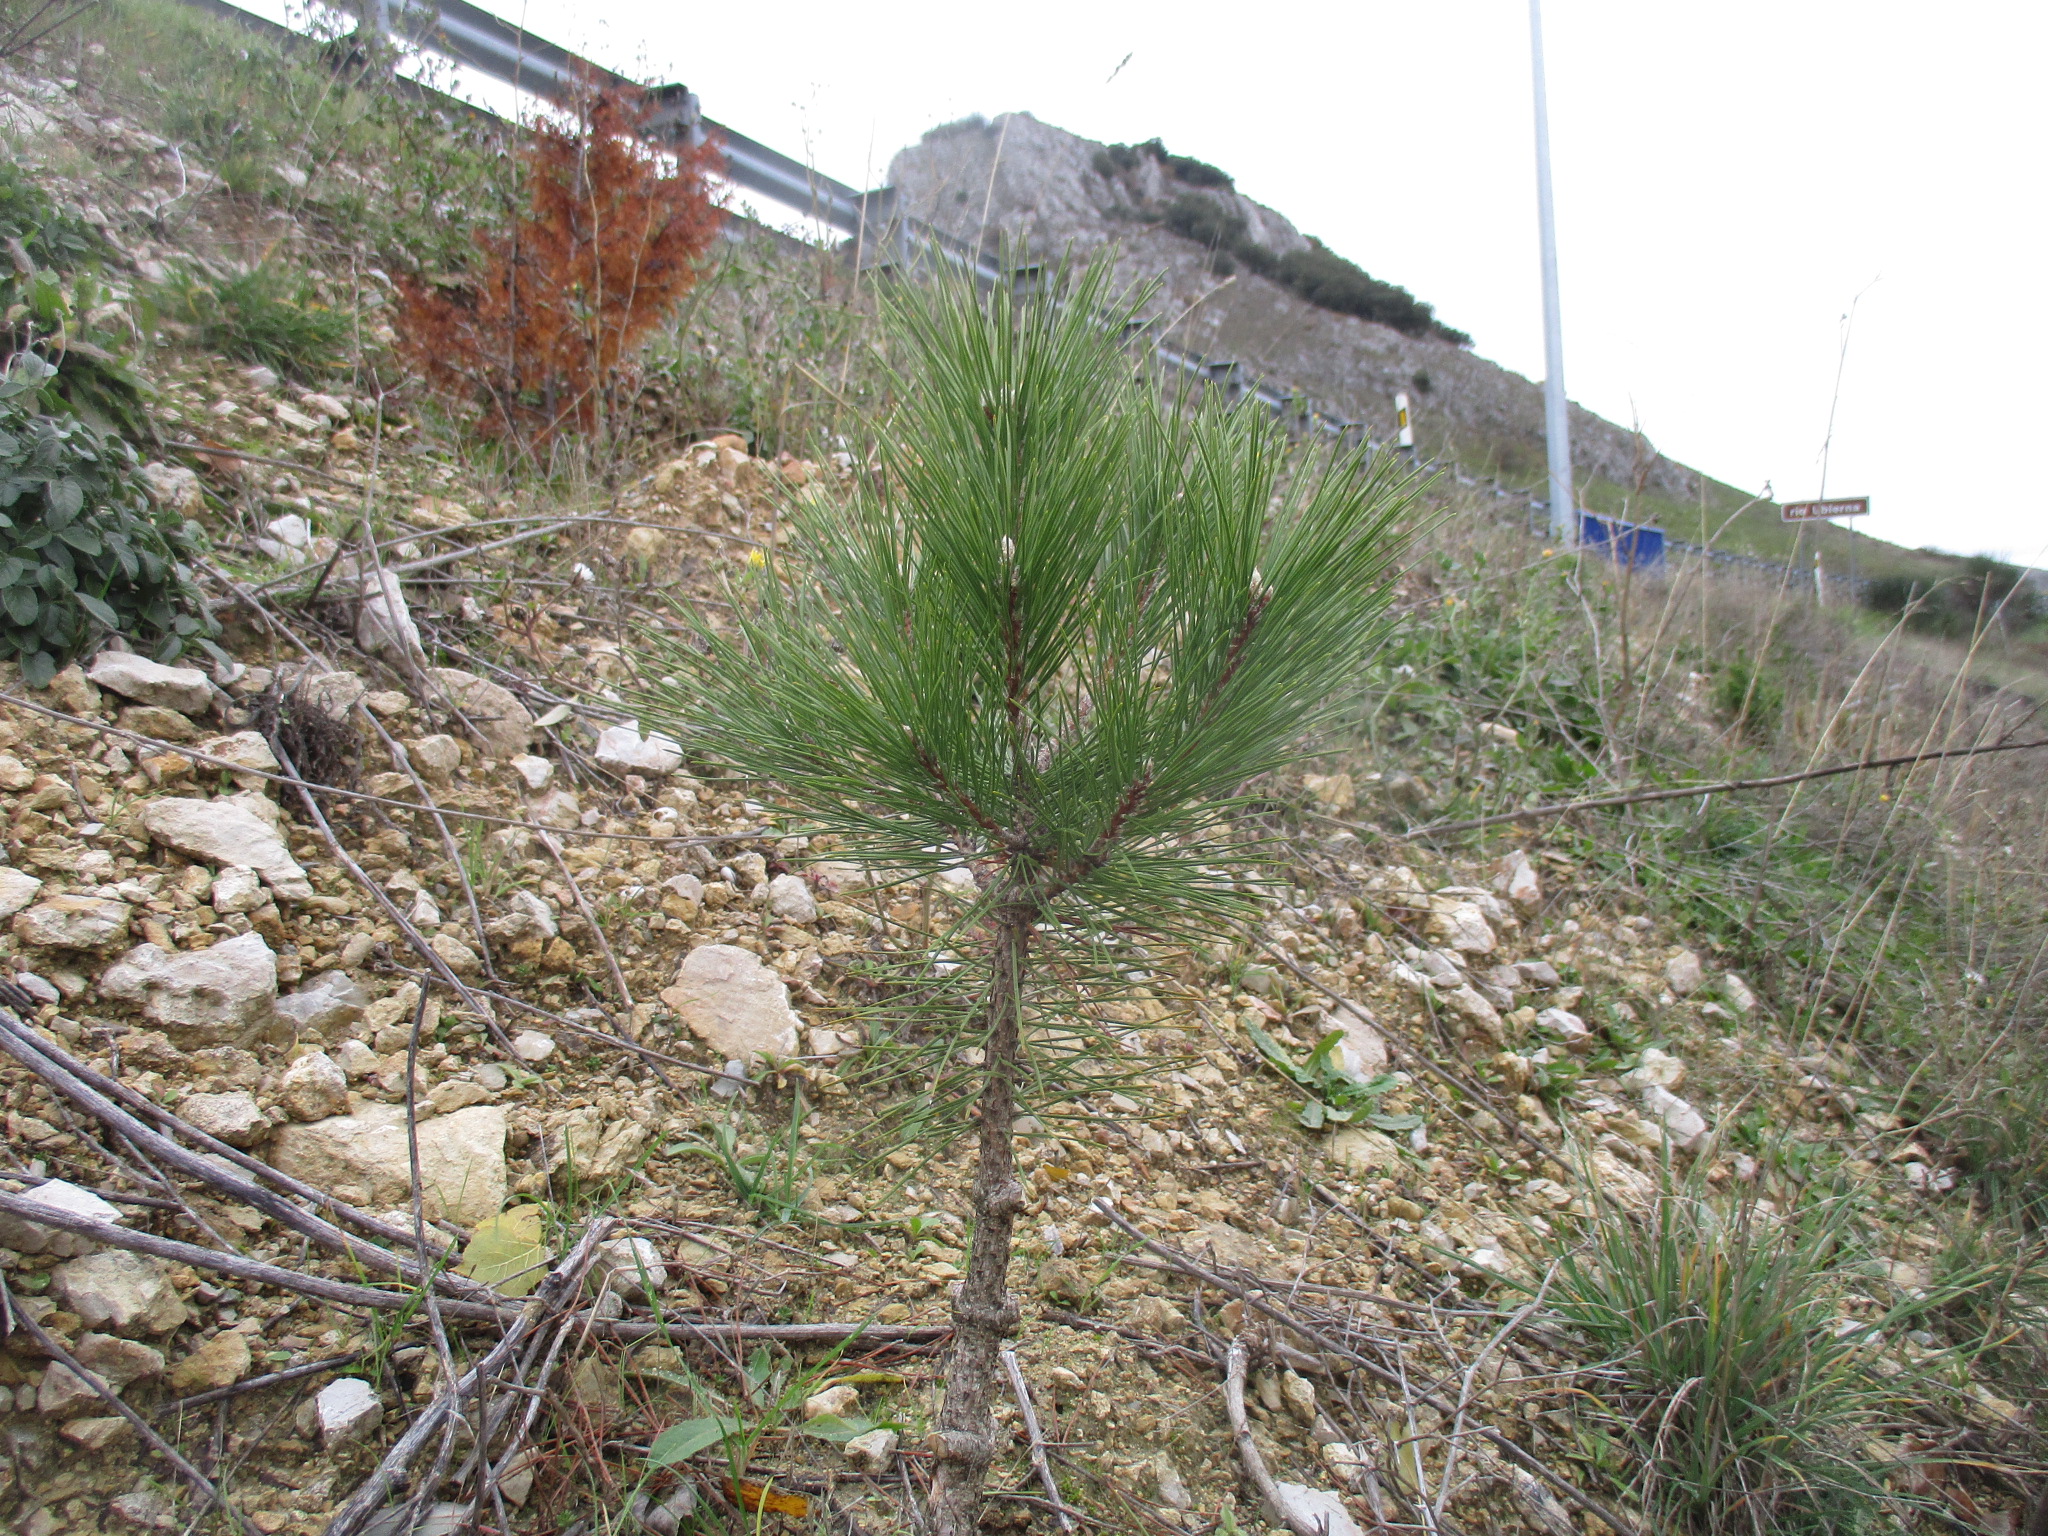 Evergreen species planted on the embankment